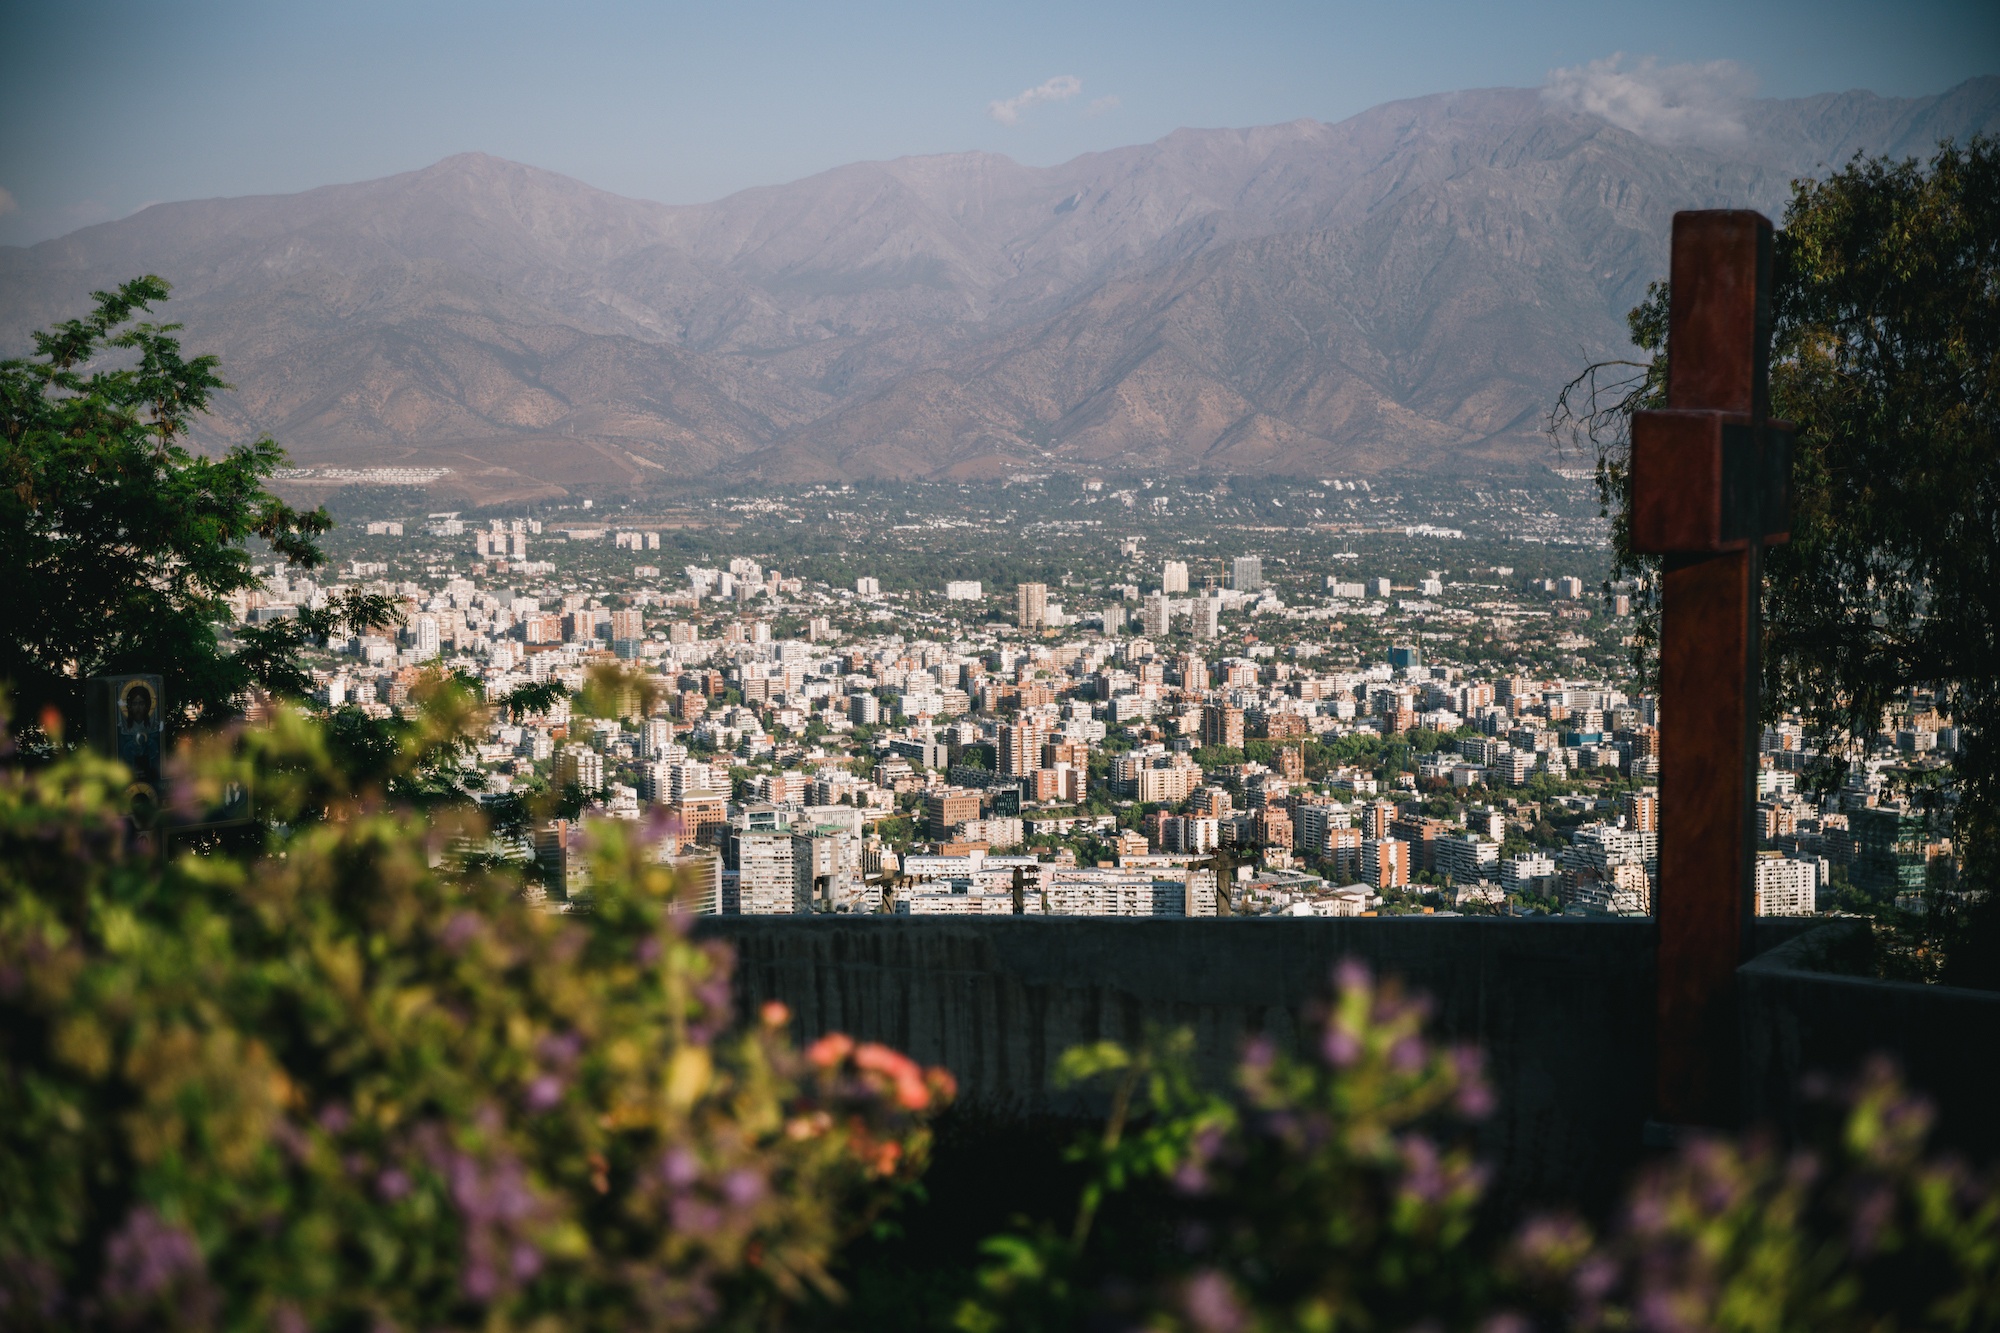 48 hours in Santiago, Chile